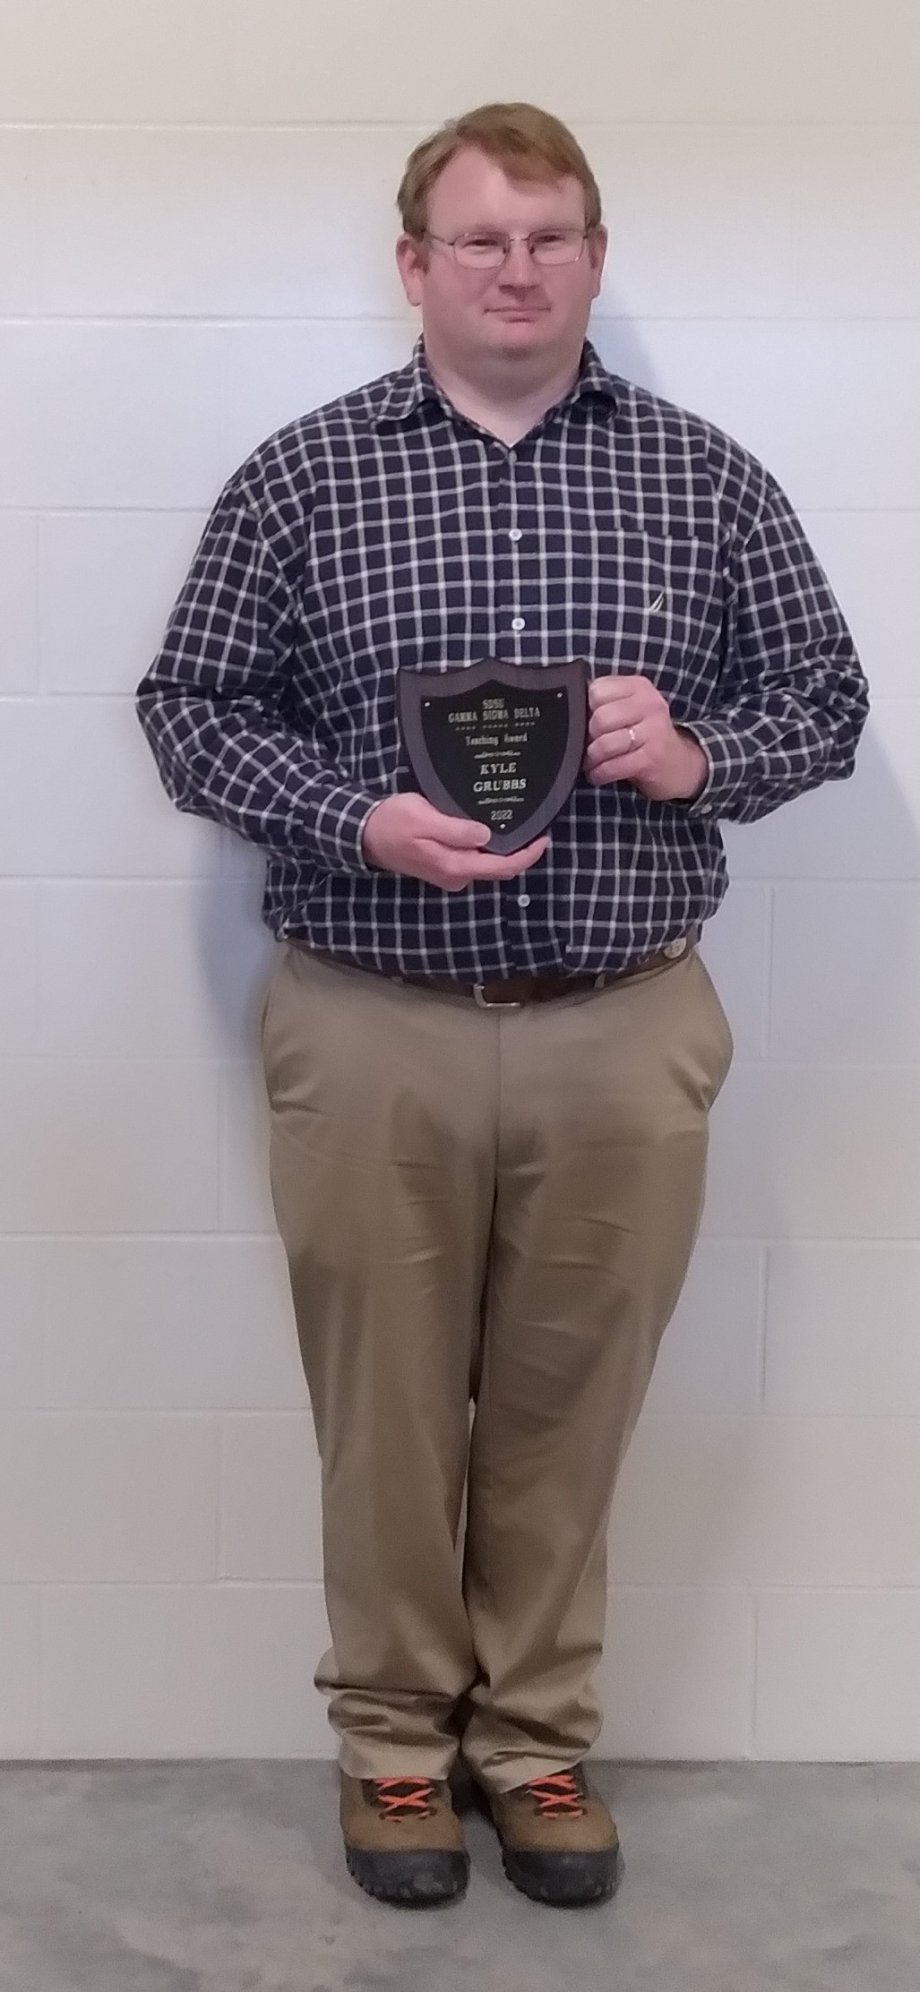 2022 GSD Teaching Award: Dr. Kyle Grubbs, Department of Animal Science